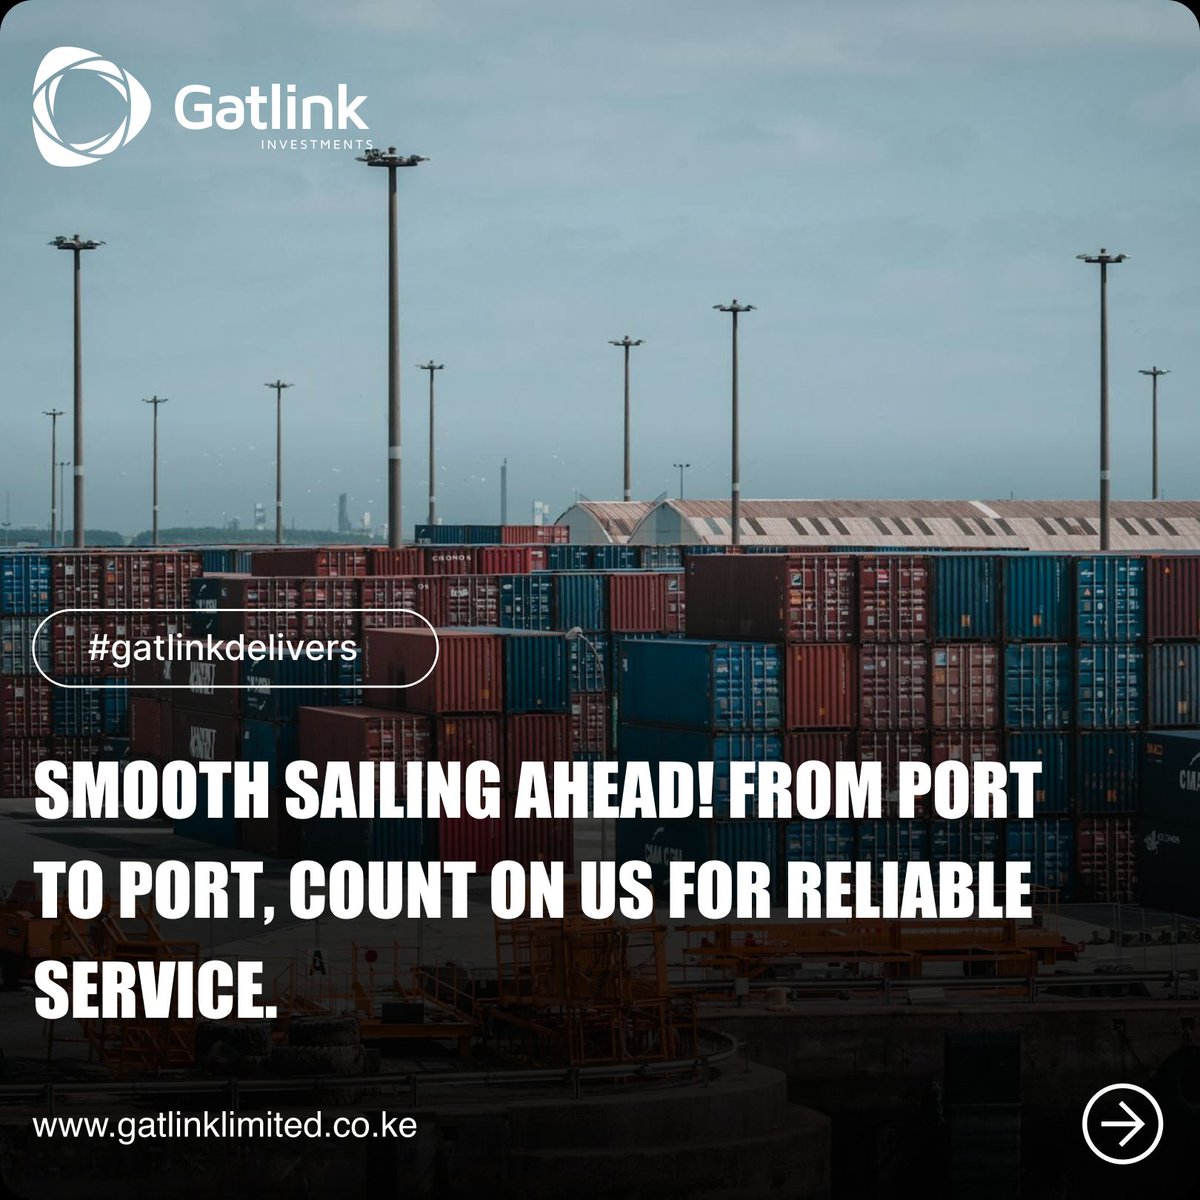 Every business has it's strength, our strength is in the oil industry. Clearing, forwarding and warehousing of petroleum products in compliance with East African customs law, rules and regulations.

#gatlinkinvestments #seacargoshipping #freightservices #kenya #rwanda #drcongo